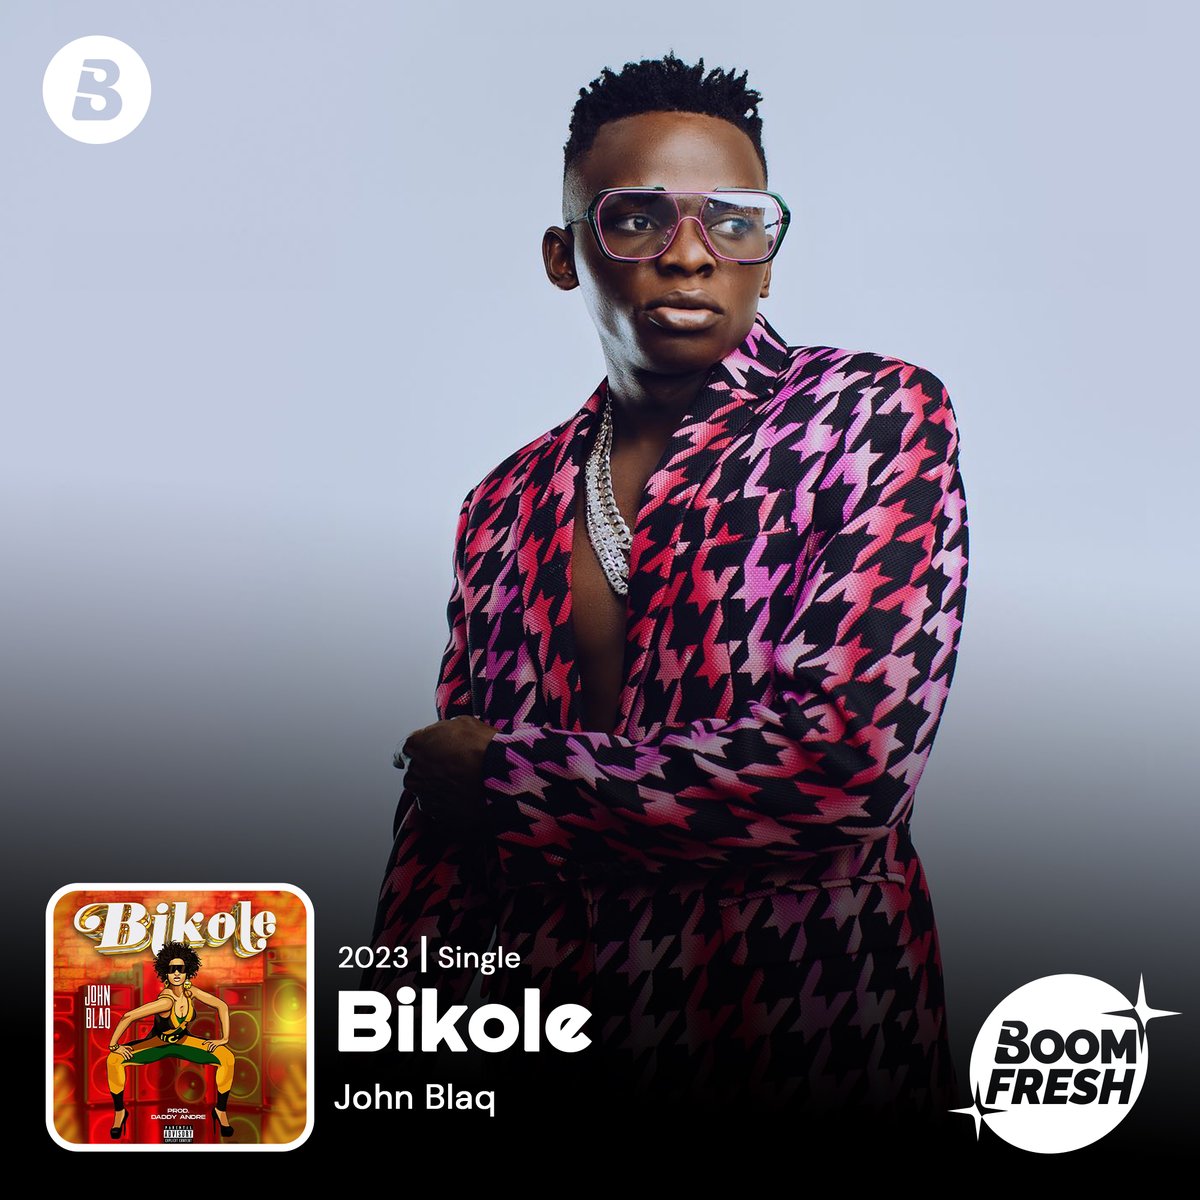 🚨BOOM FRESH🚨 Let's listen to some #Bikole, a fresh tune coming in from @JohnBlaqMusic Check it out on #boomplay